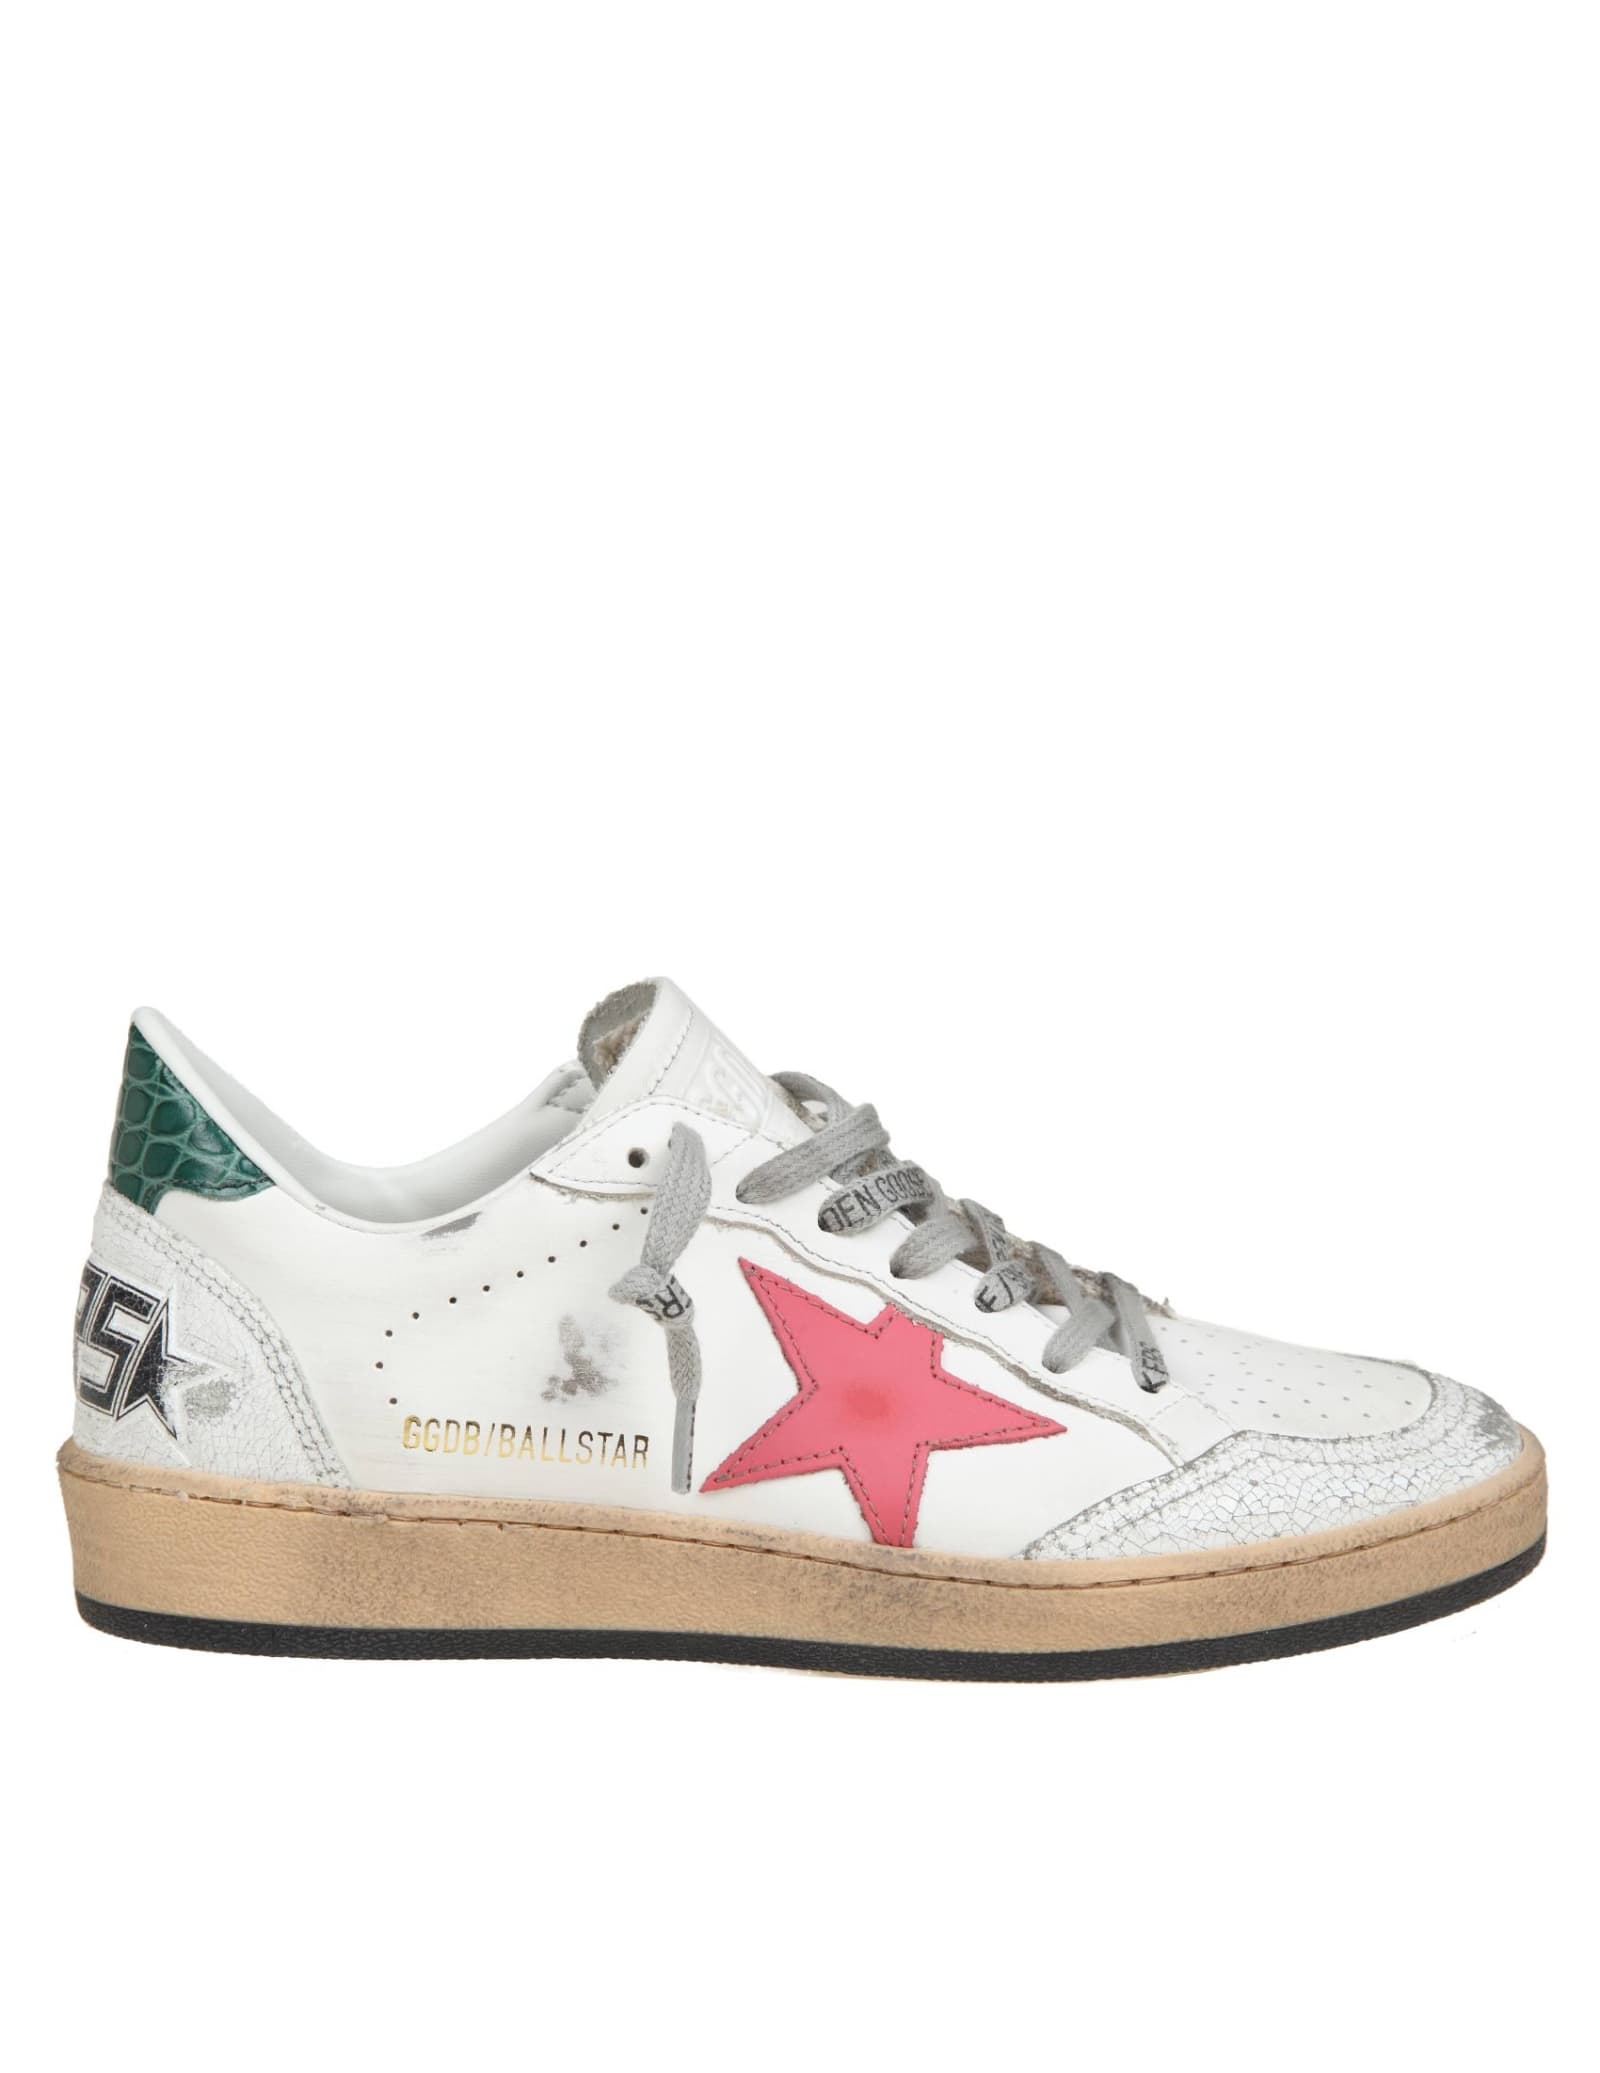 Golden Goose Ballstar In White And Pink Leather In Neutral